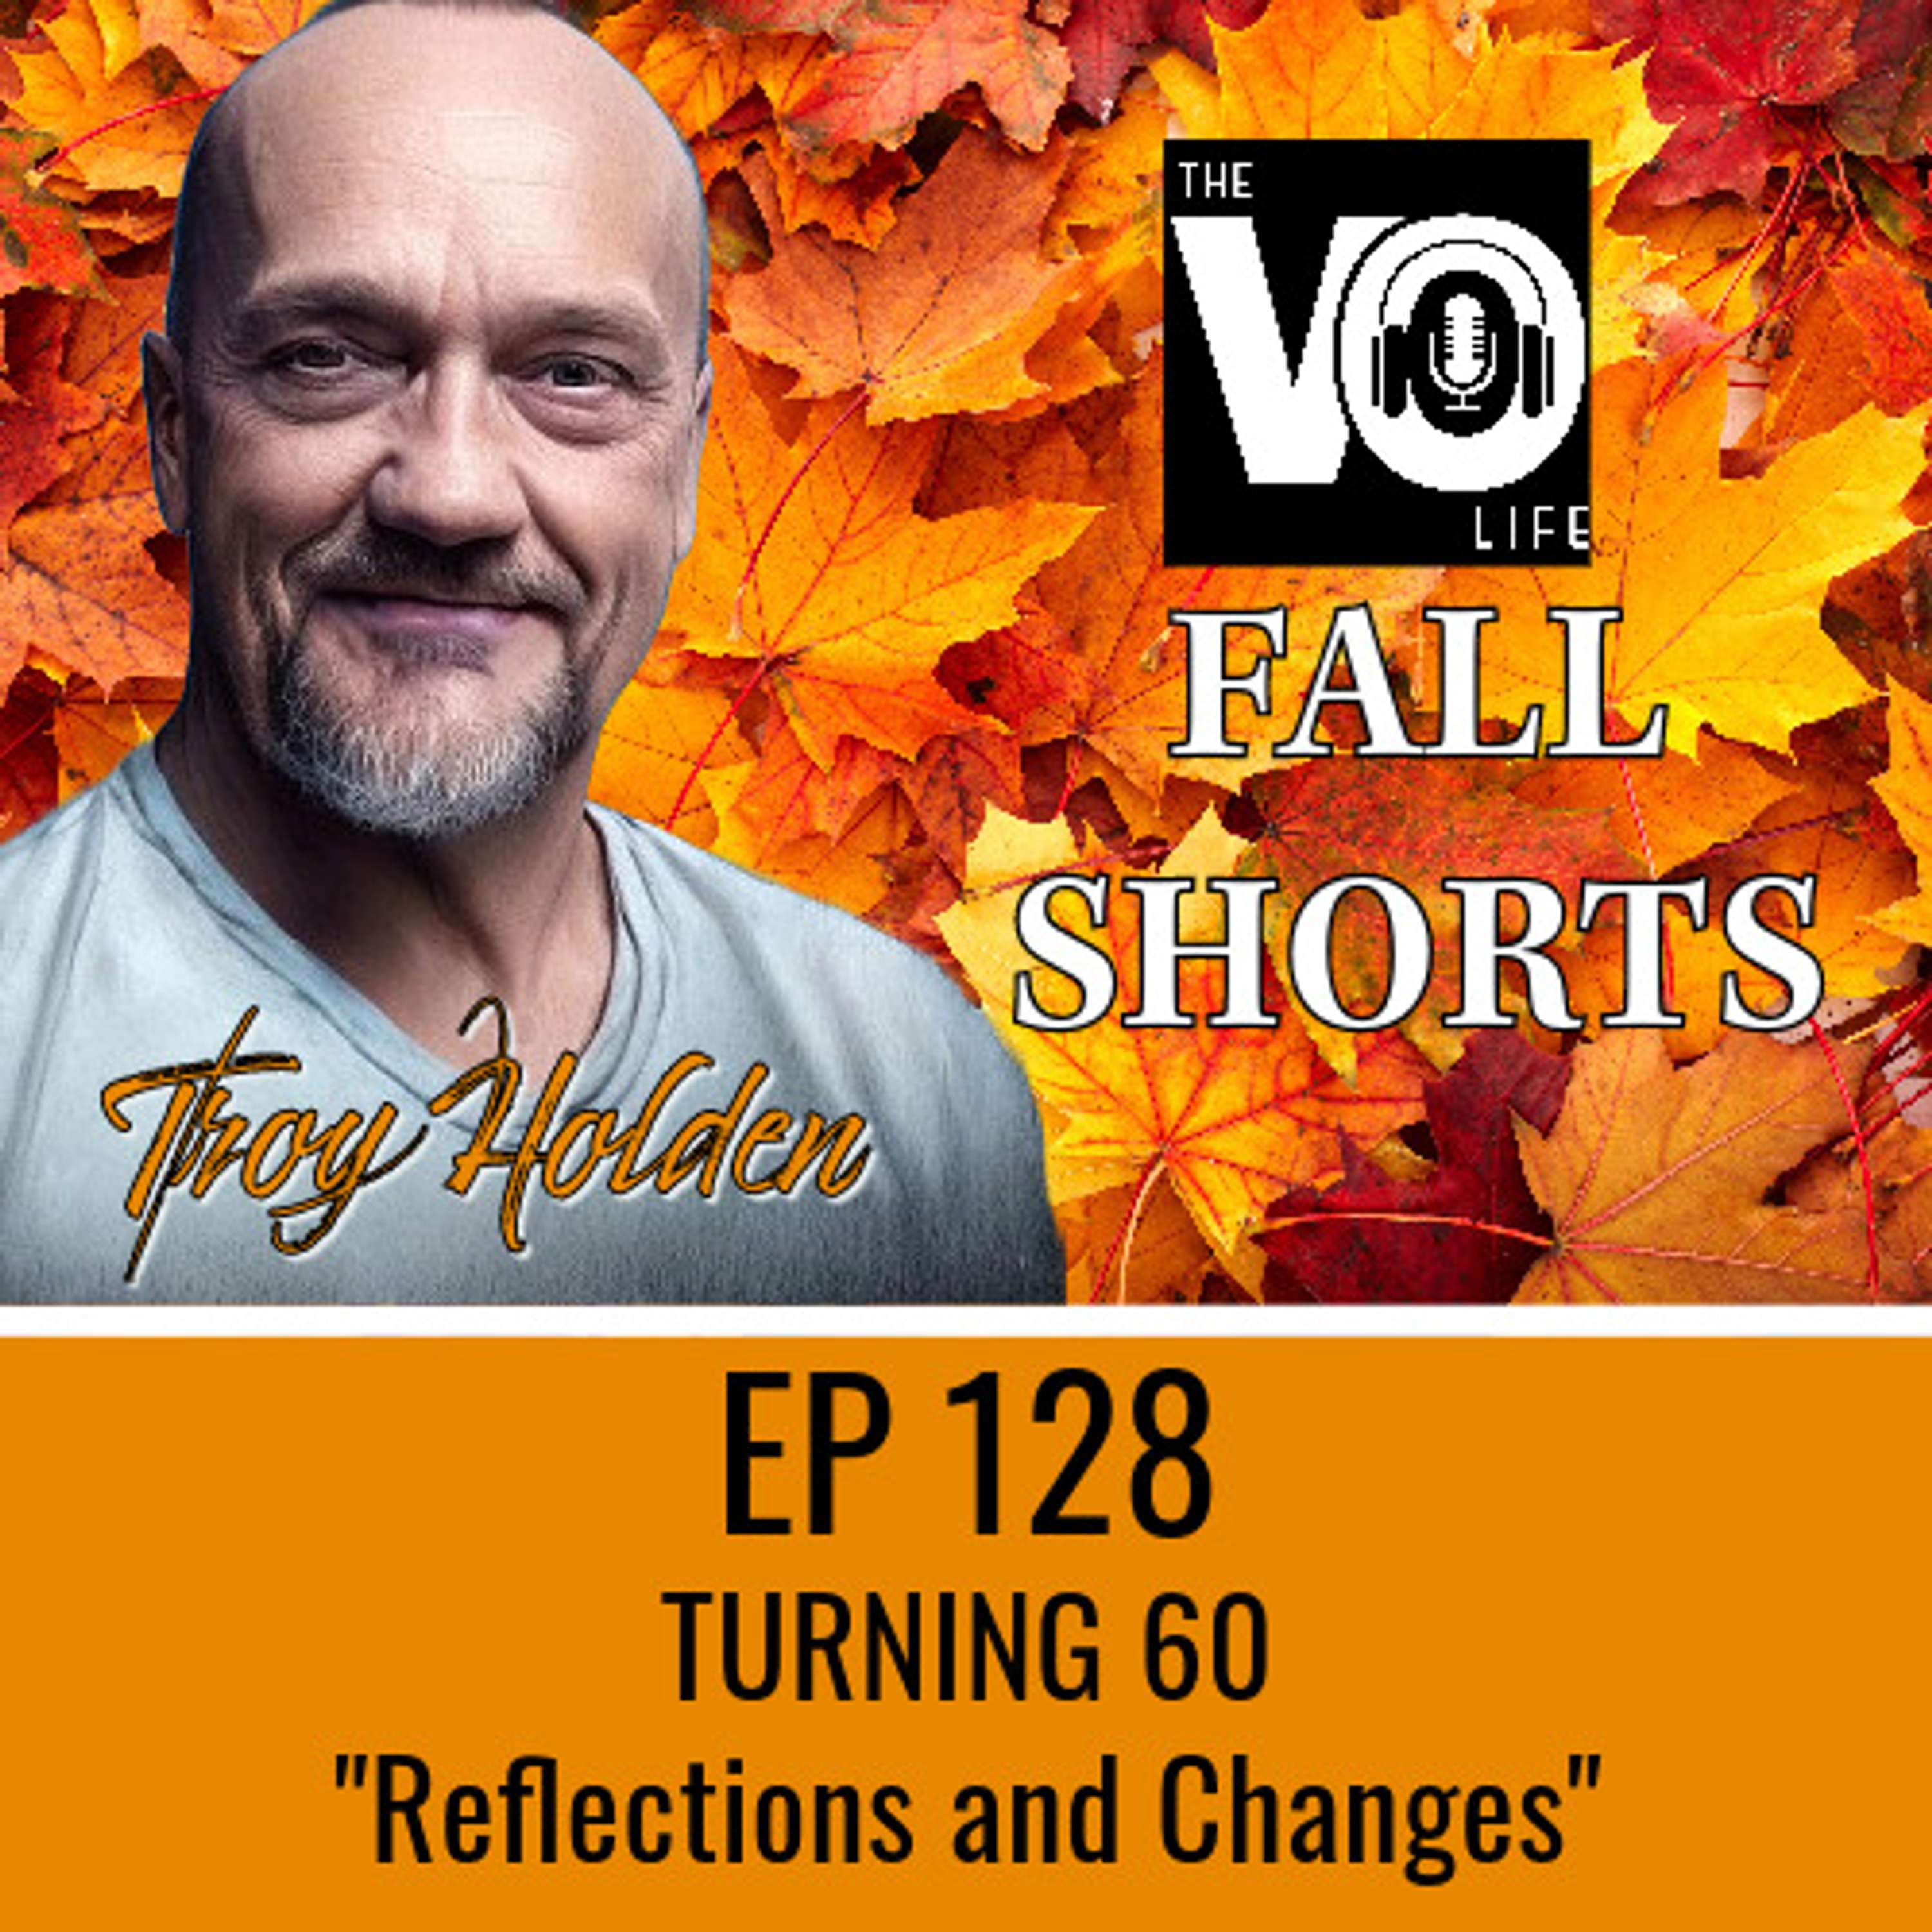 Ep 128 - FALL SHORTS #3 - TURNING 60 - Reflections and Changes